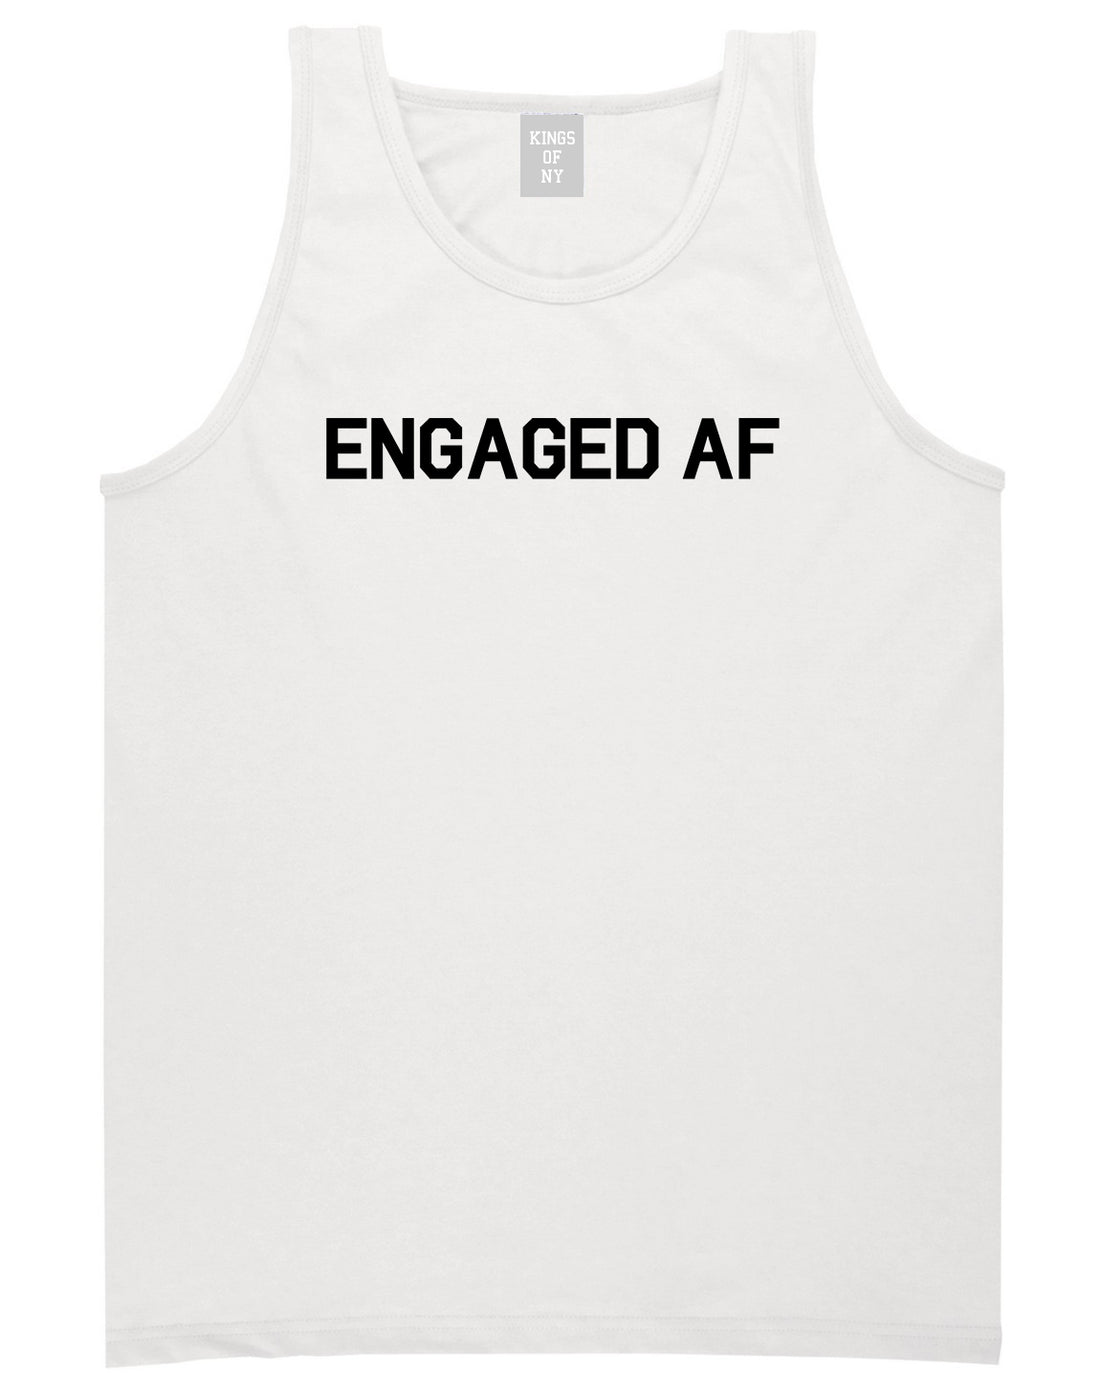 Engaged_AF_Fiance Mens White Tank Top Shirt by Kings Of NY